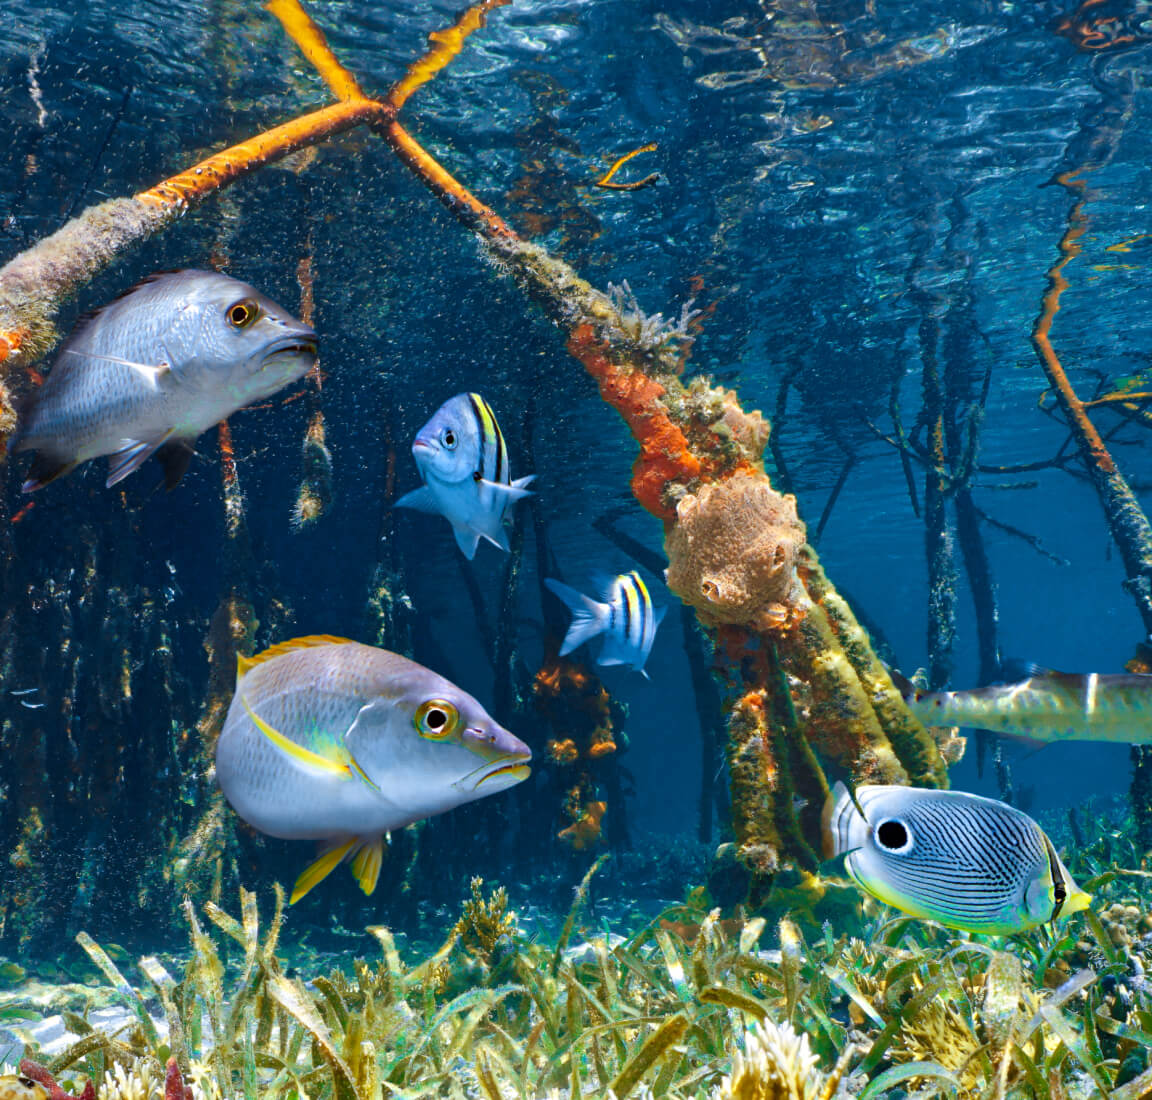 An underwater photo of yellow and blue fish swimming through a coral reef in deep blue waters